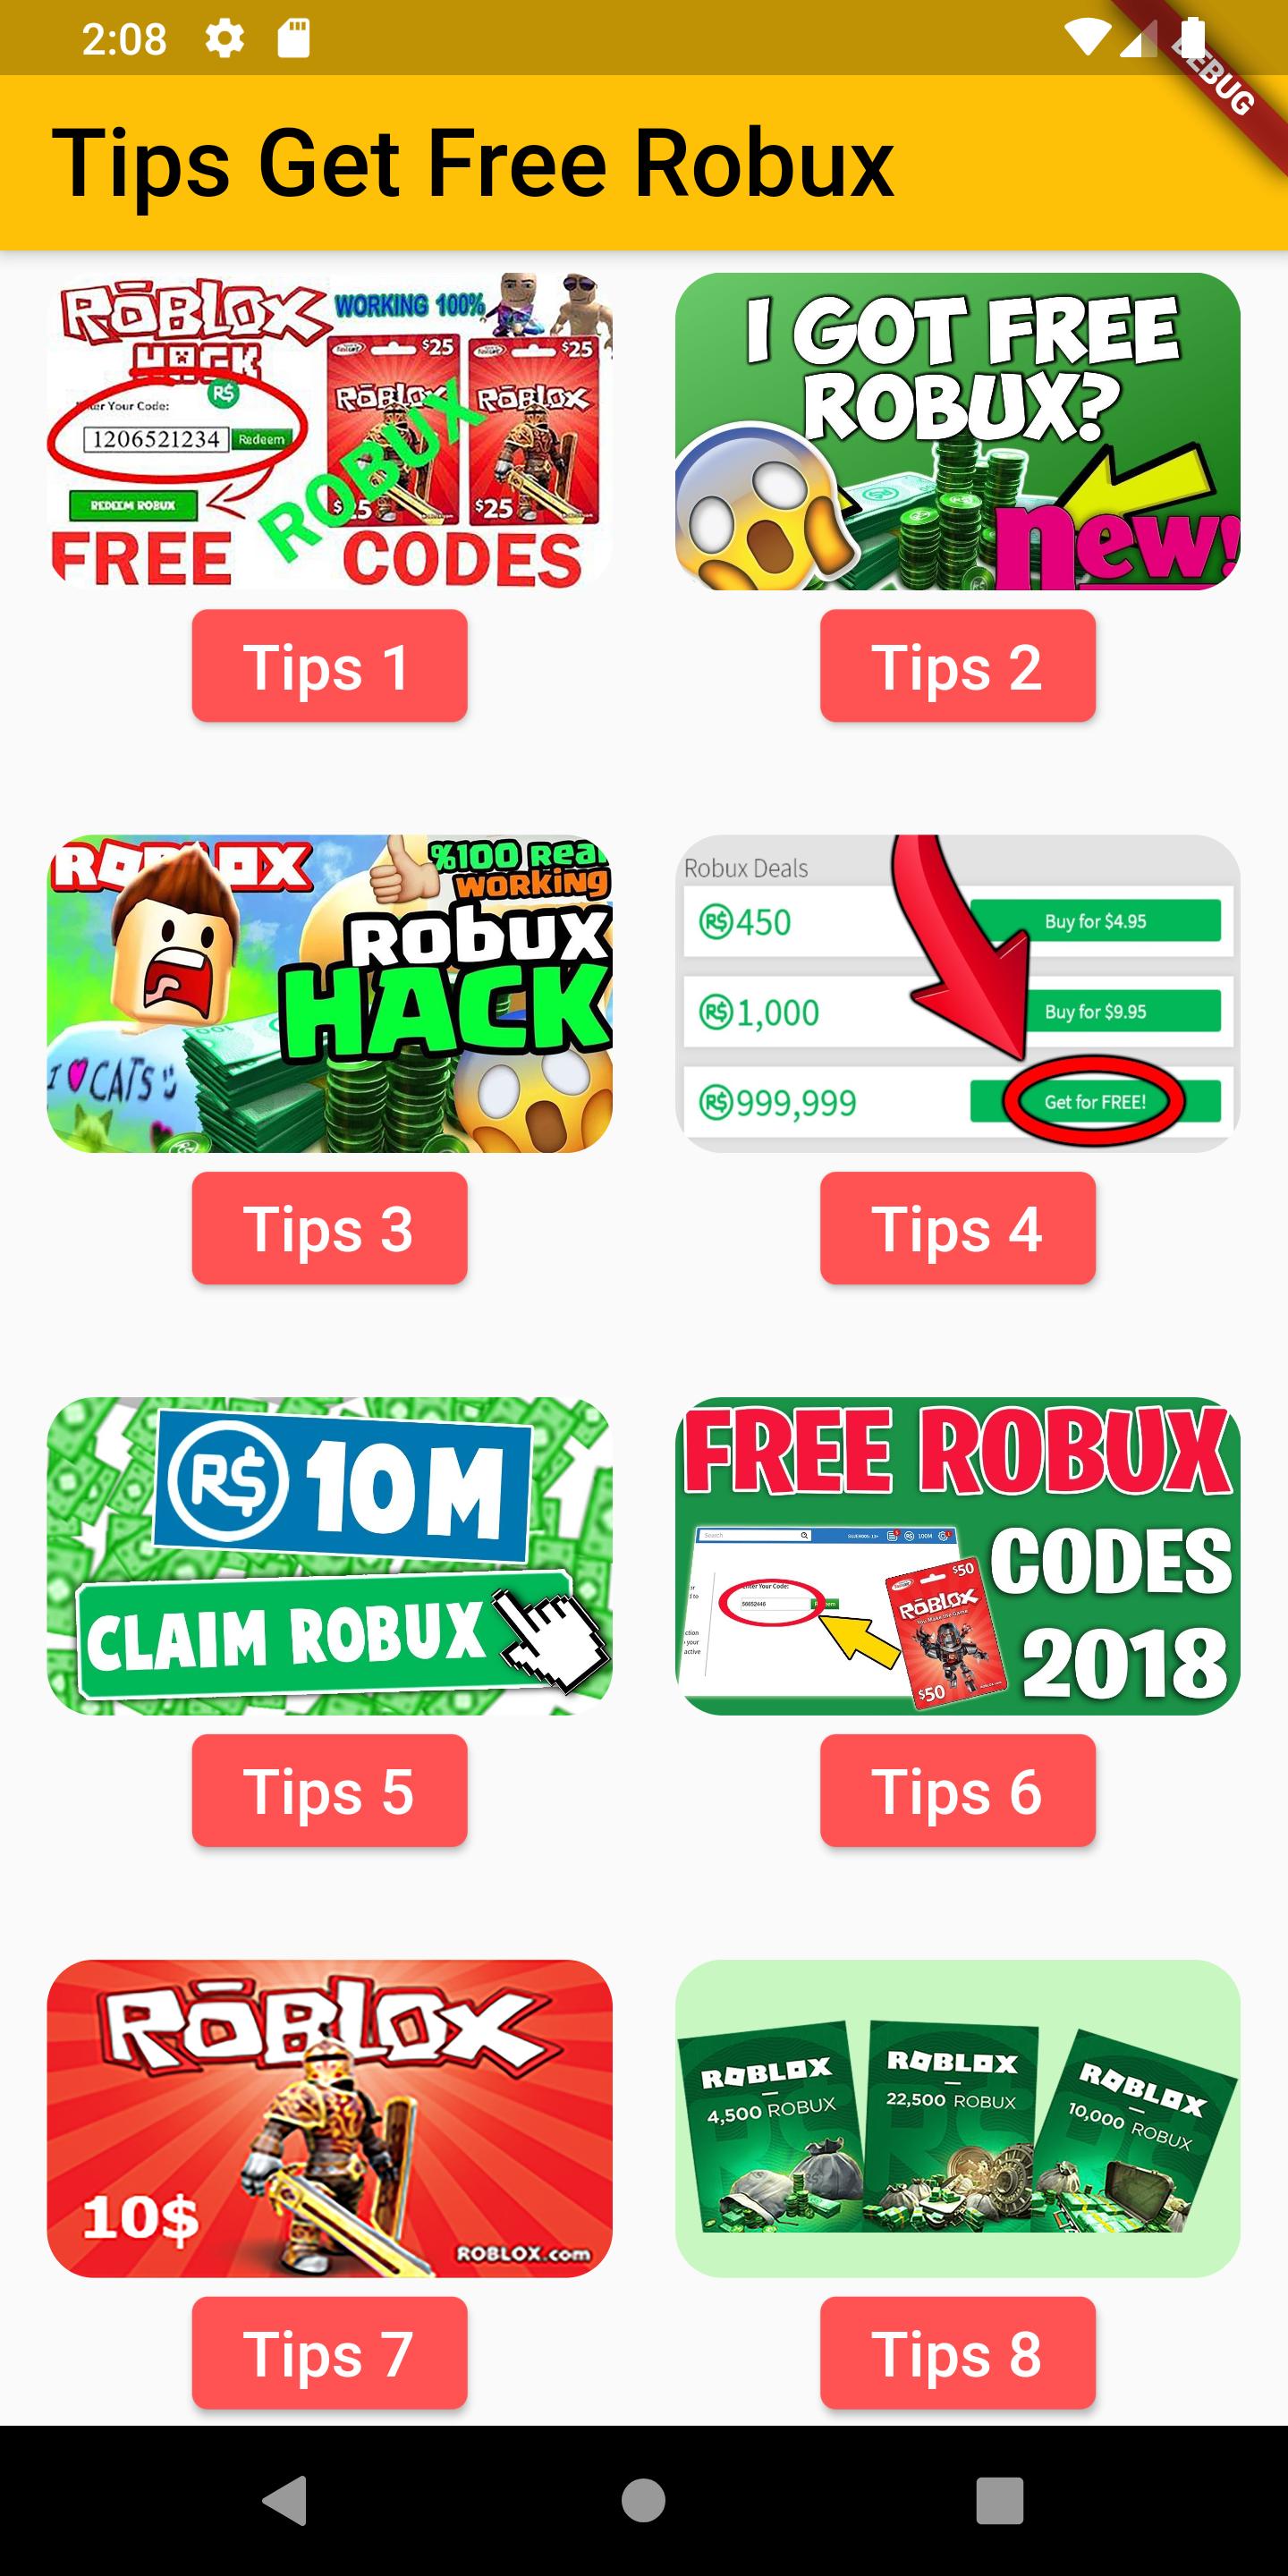 Trips Get Free Robux For Roblox Rbx For Android Apk Download - robloxhelp free robux